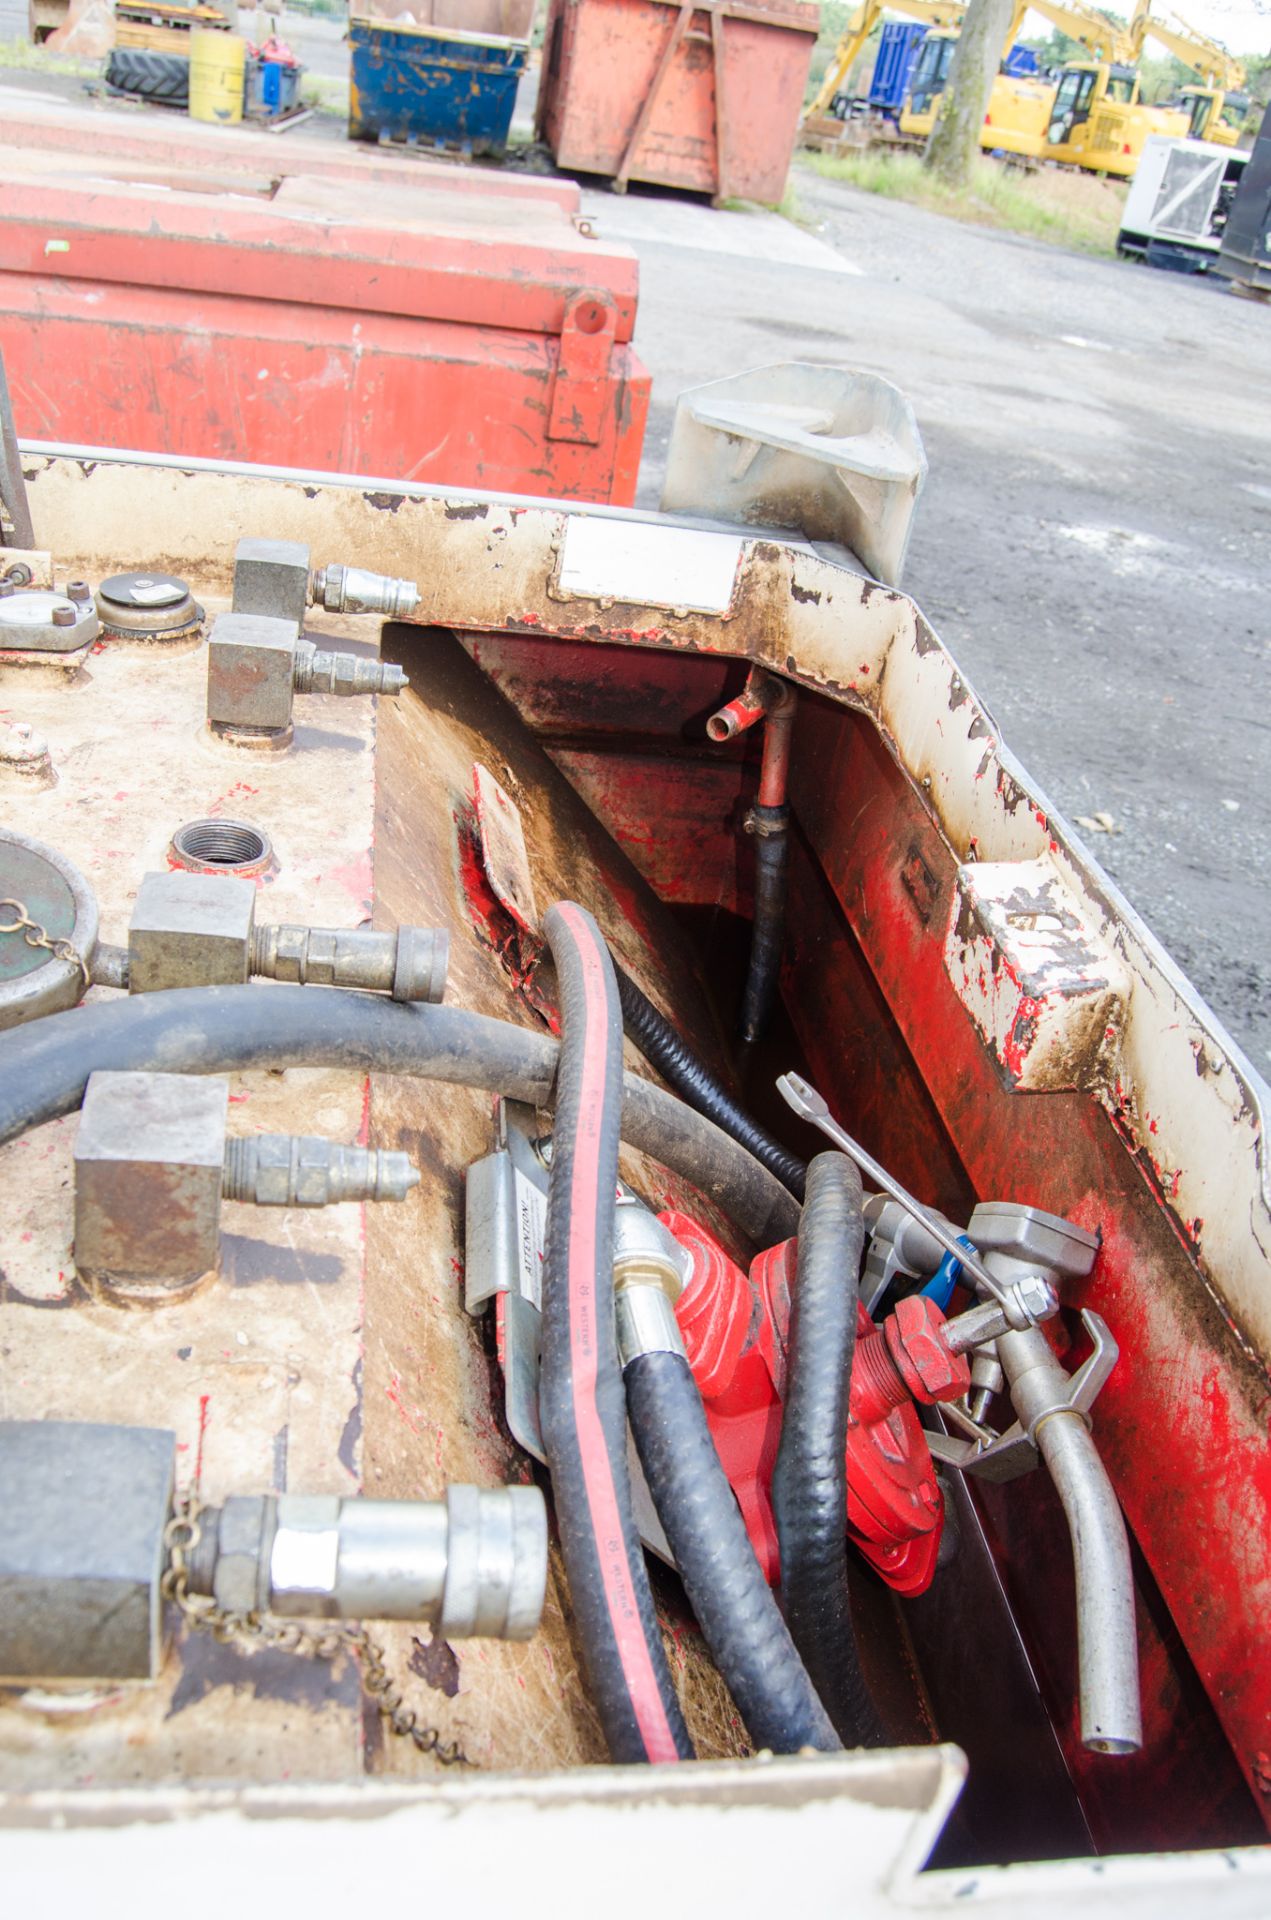 Western 2950 litre static bunded fuel bowser c/w manual pump, delivery hose and nozzle - Image 3 of 3